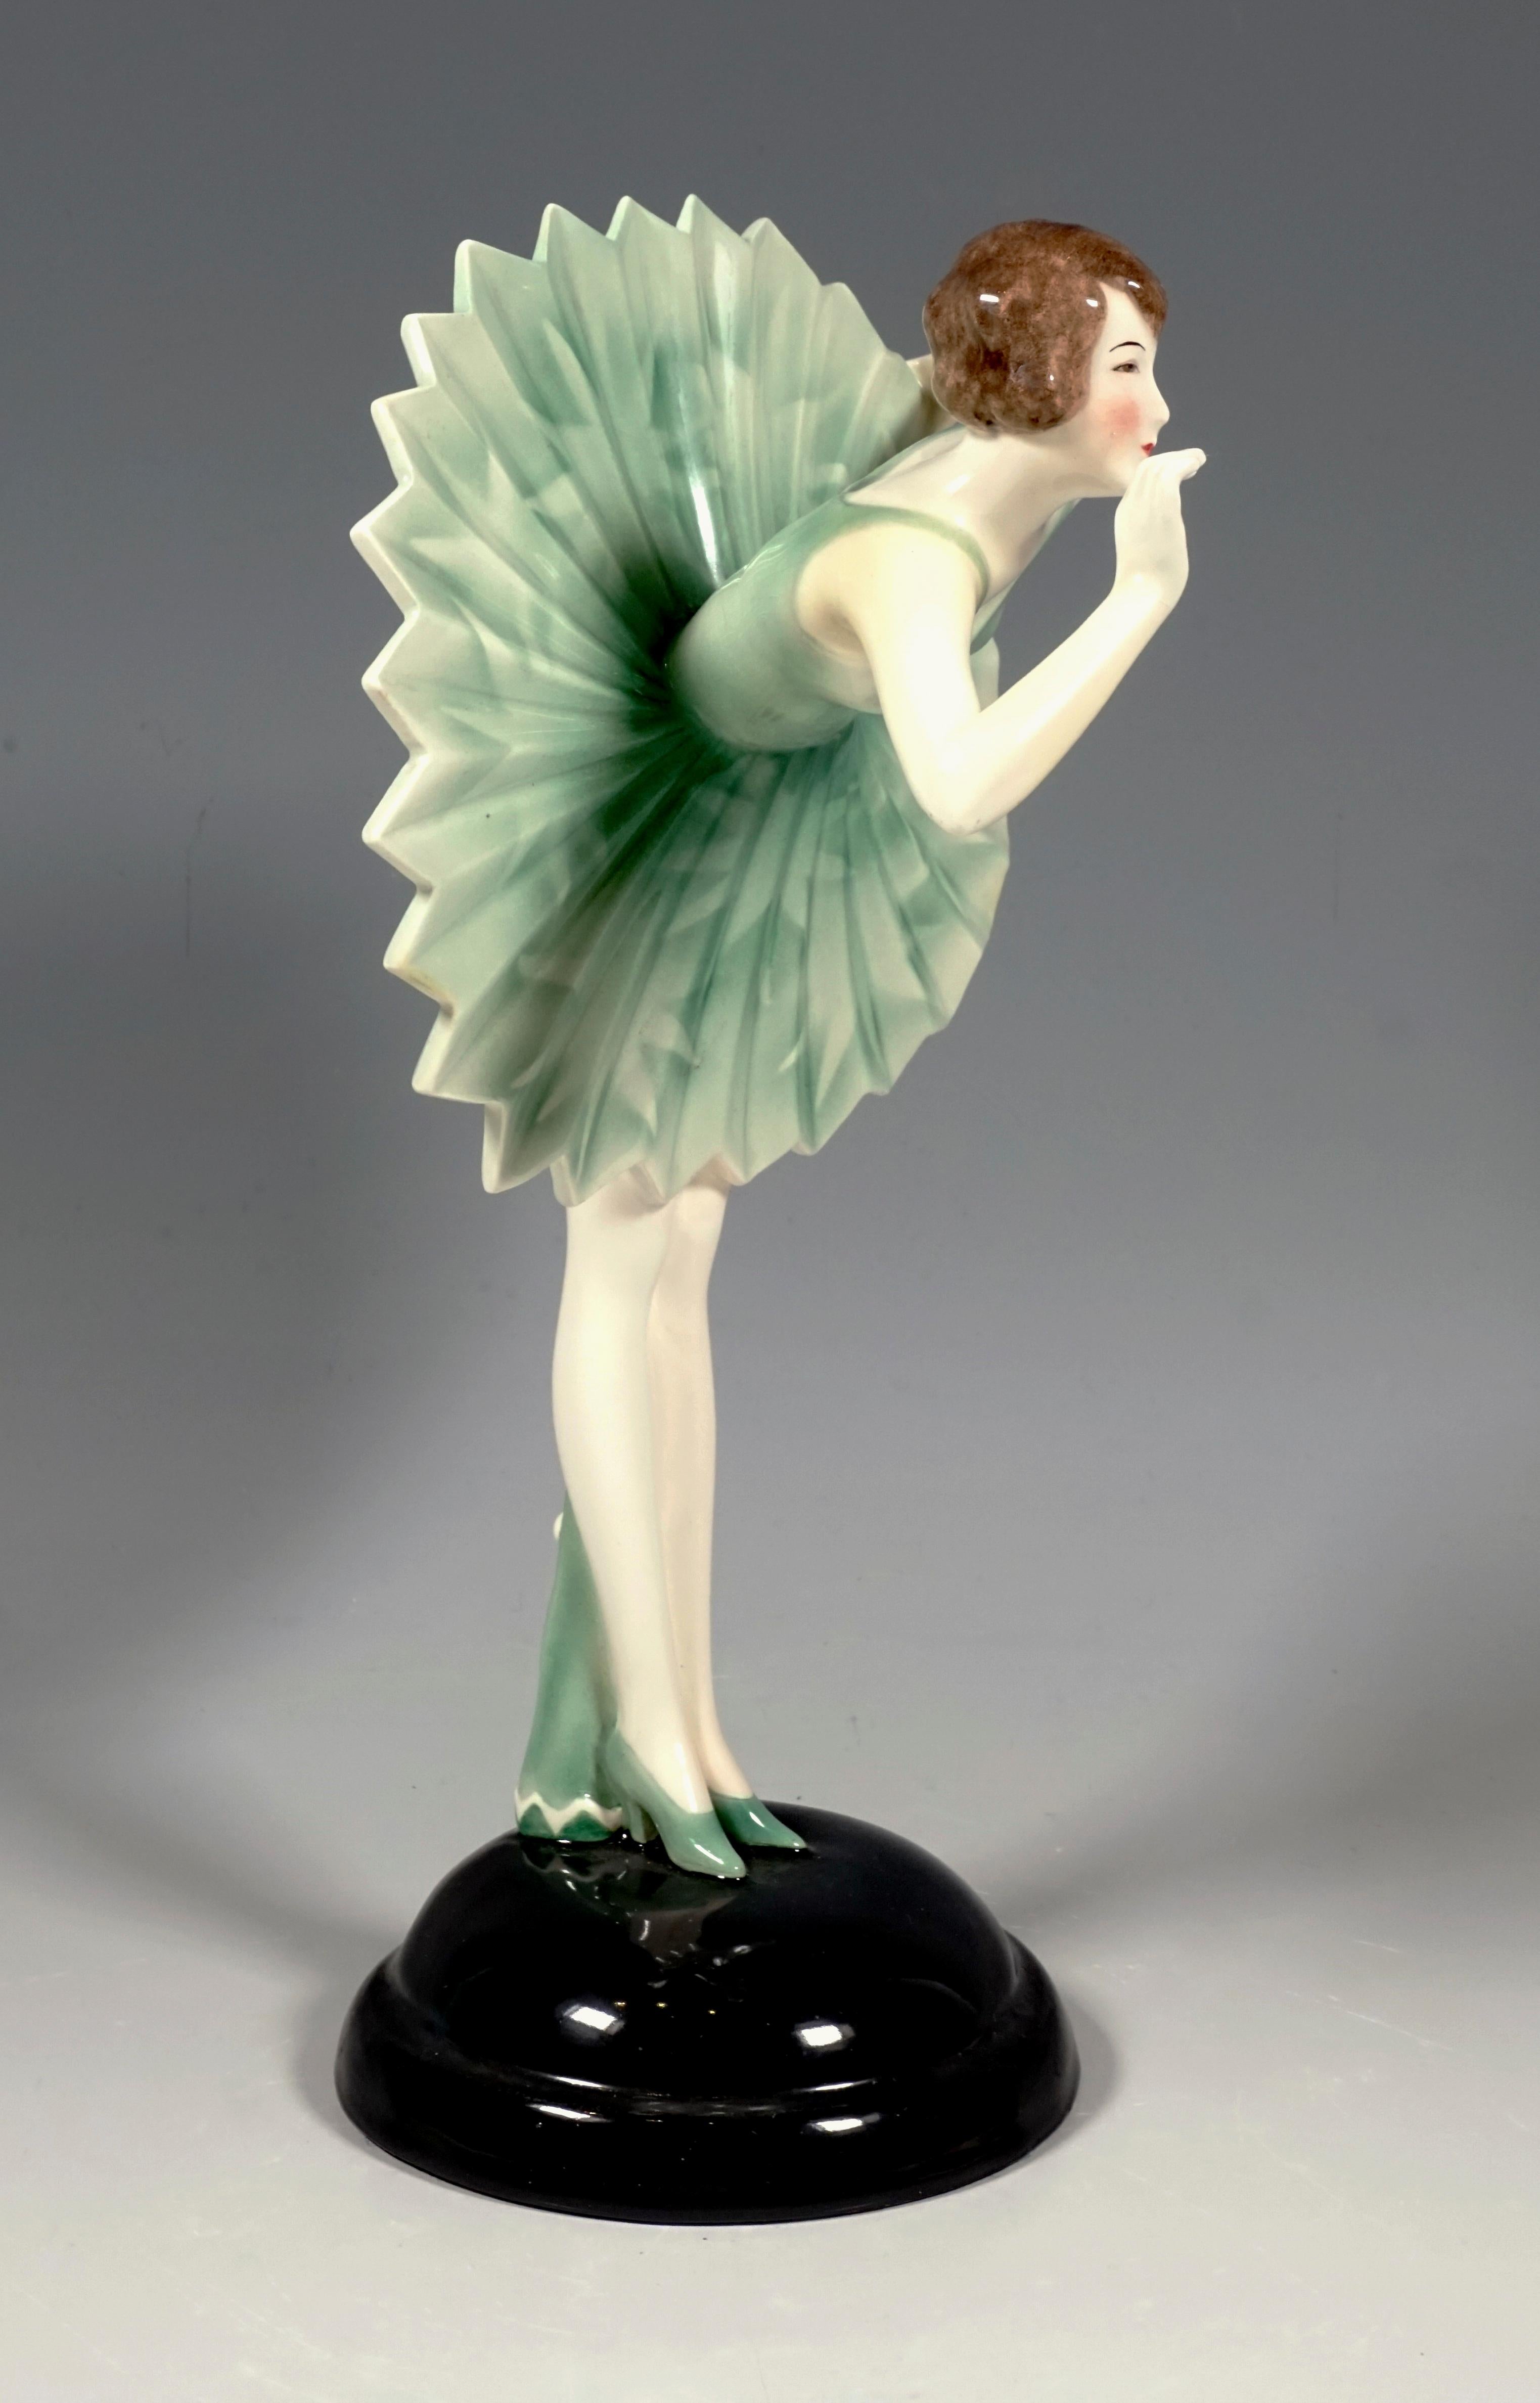 Remarkable Art Deco Goldscheider ceramics figurine of the 1930s:
Young dancer with short hair, bowing in front of her audience, so that the pleated skirt with zigzag hem stands up like a star, behind her on the ground there is a pointed hat.
On a